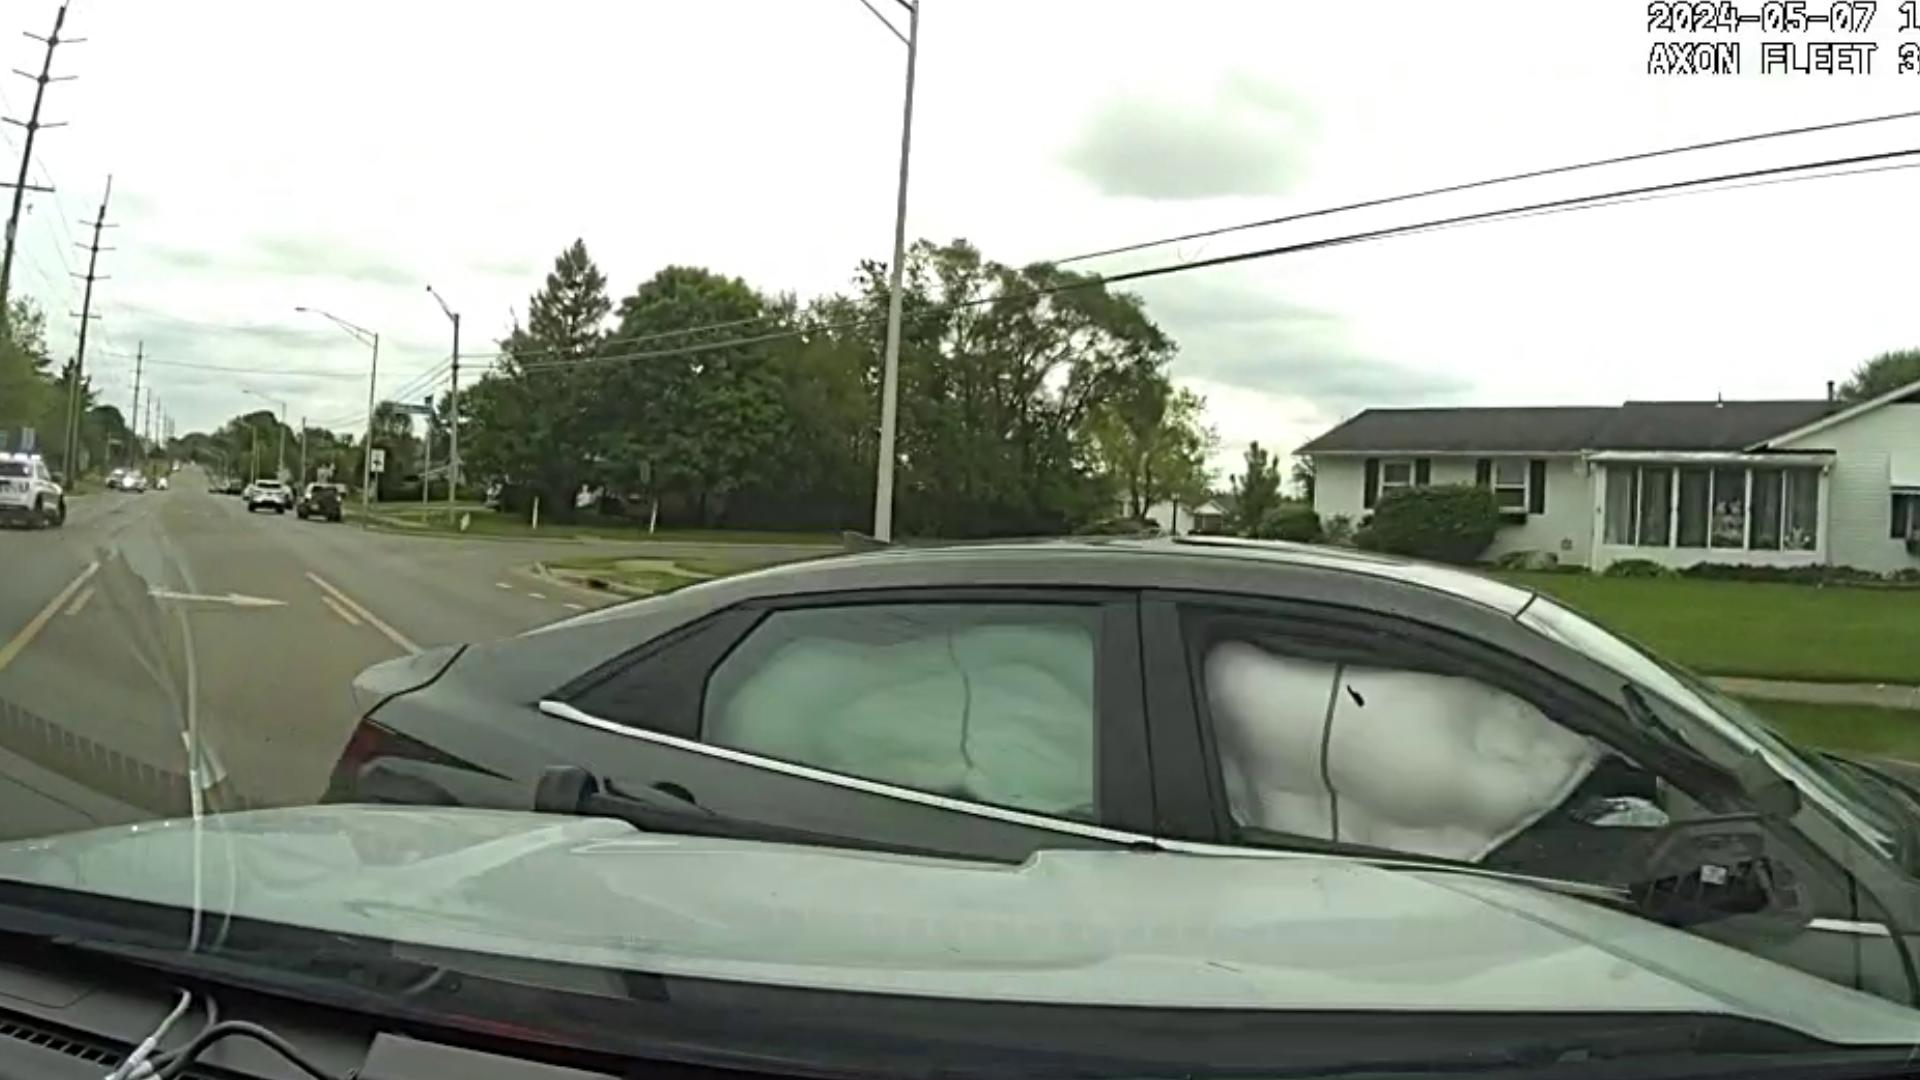 The Columbus Division of Police released multiple dash camera videos showing a chase between two teenagers in a stolen Hyundai and police.